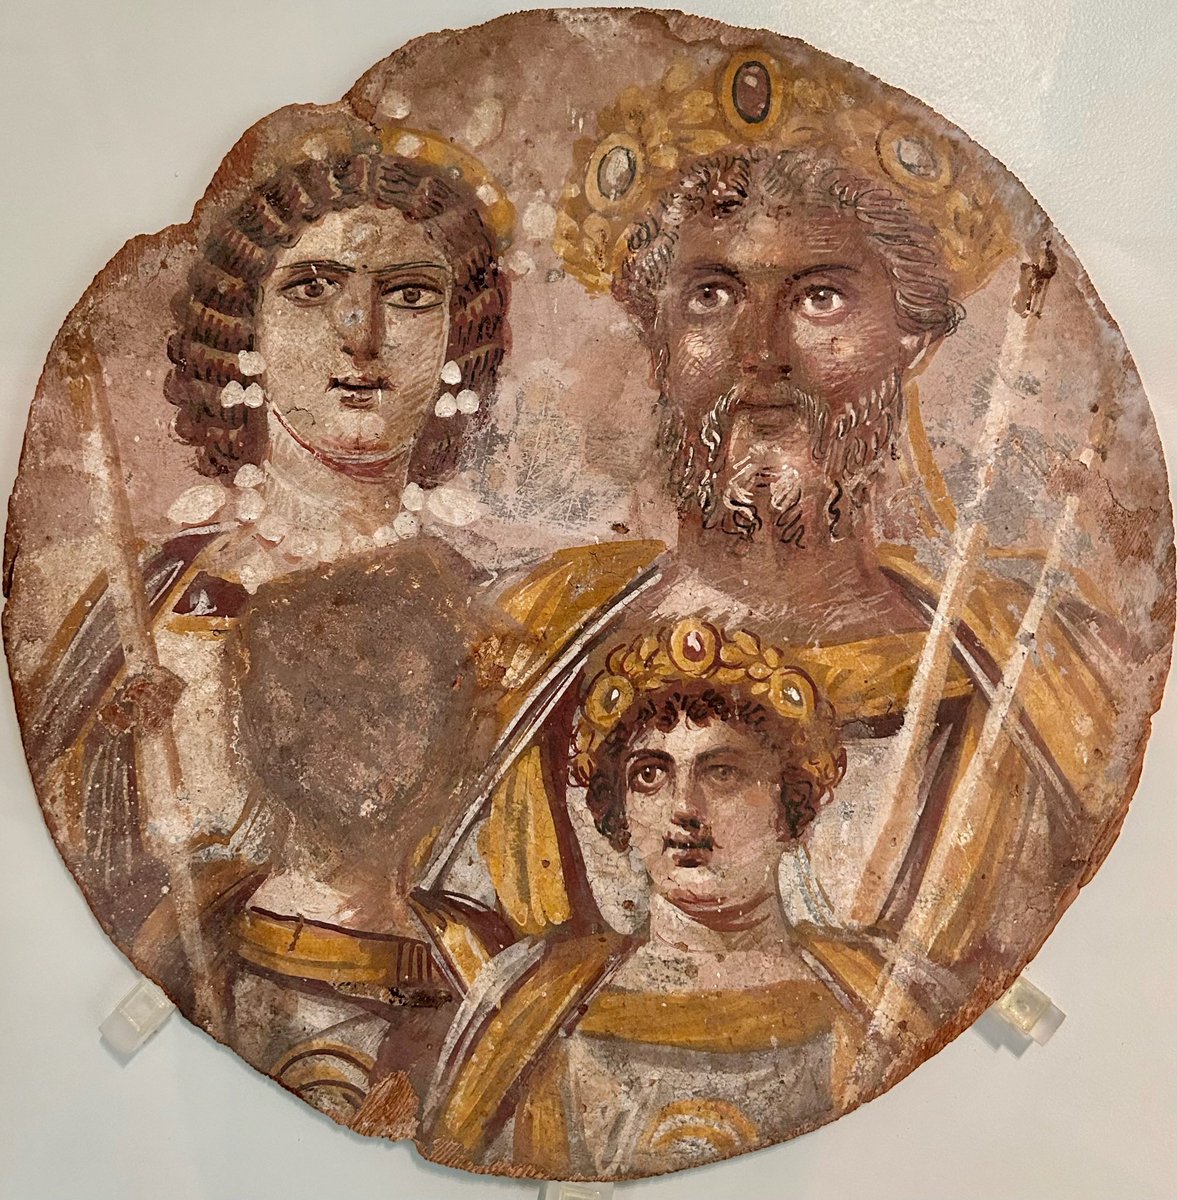 The ‘Severan Tondo’ depicting Septimius Severus, his wife Julia Domna, and their sons Caracalla & Geta (face scratched out). Painted on wood, the imperial portrait dates to around 200 AD, and originated from Egypt. On display at the Altes Museum in Berlin. #Woodensday 📸 My own